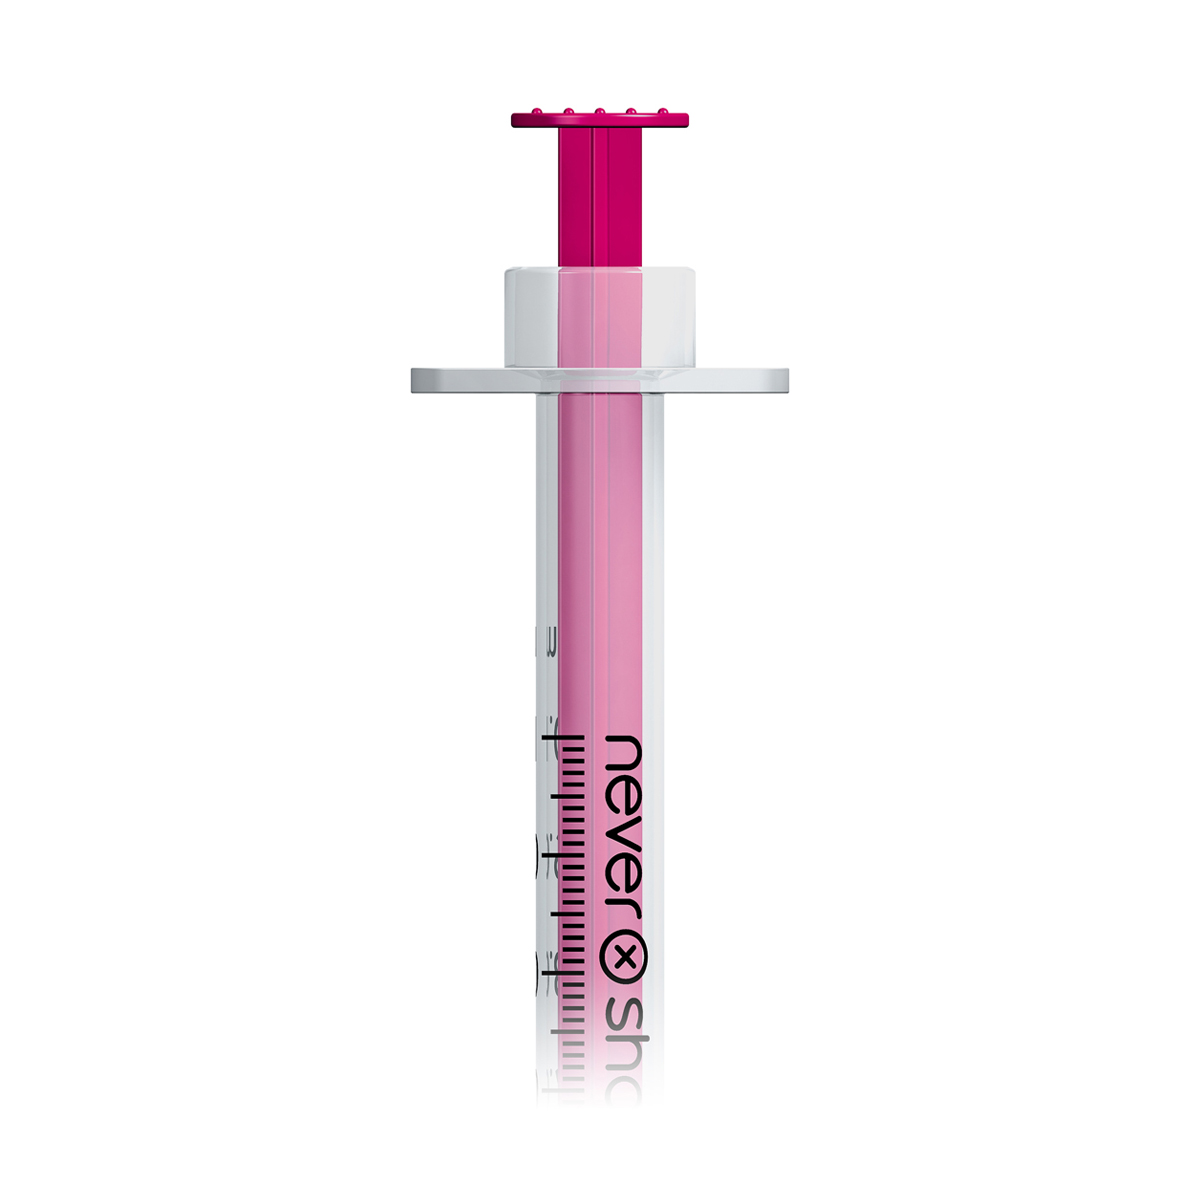 Nevershare 1ml 30G fixed needle syringe: pink  (discontinued, see below)